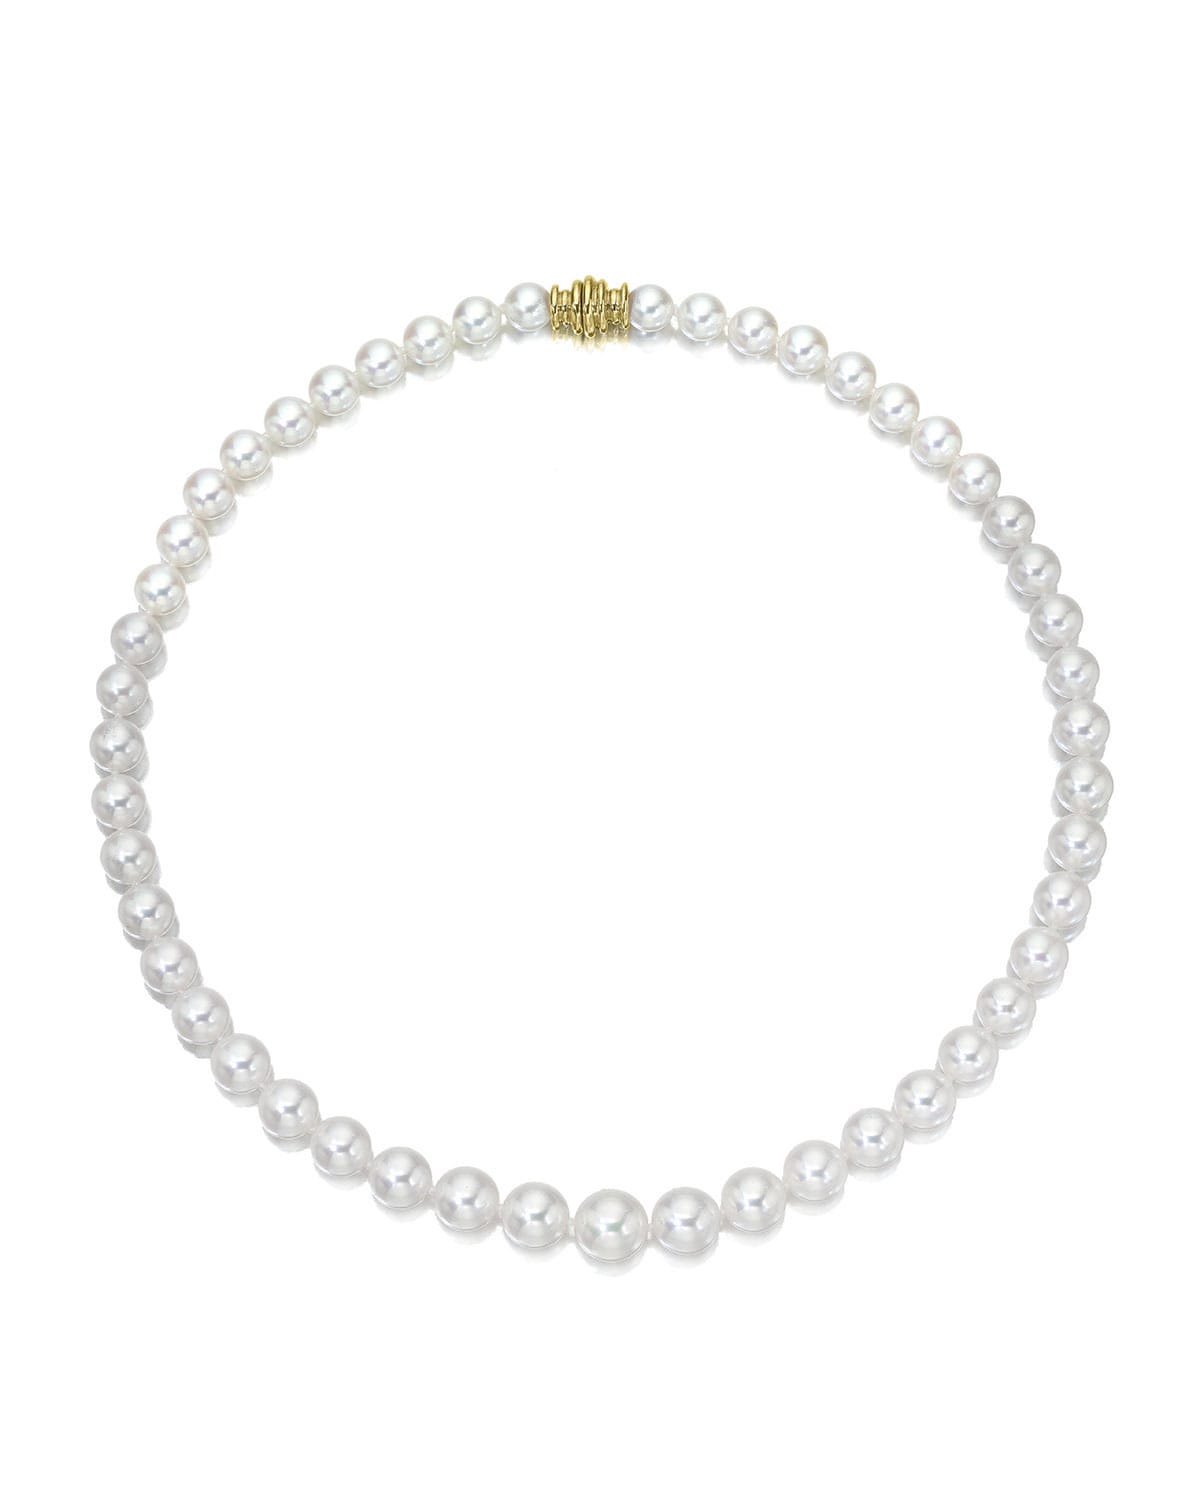 Assael 16" Akoya Cultured Graduated 6.5-9.5mm Pearl Necklace with Yellow Gold Clasp